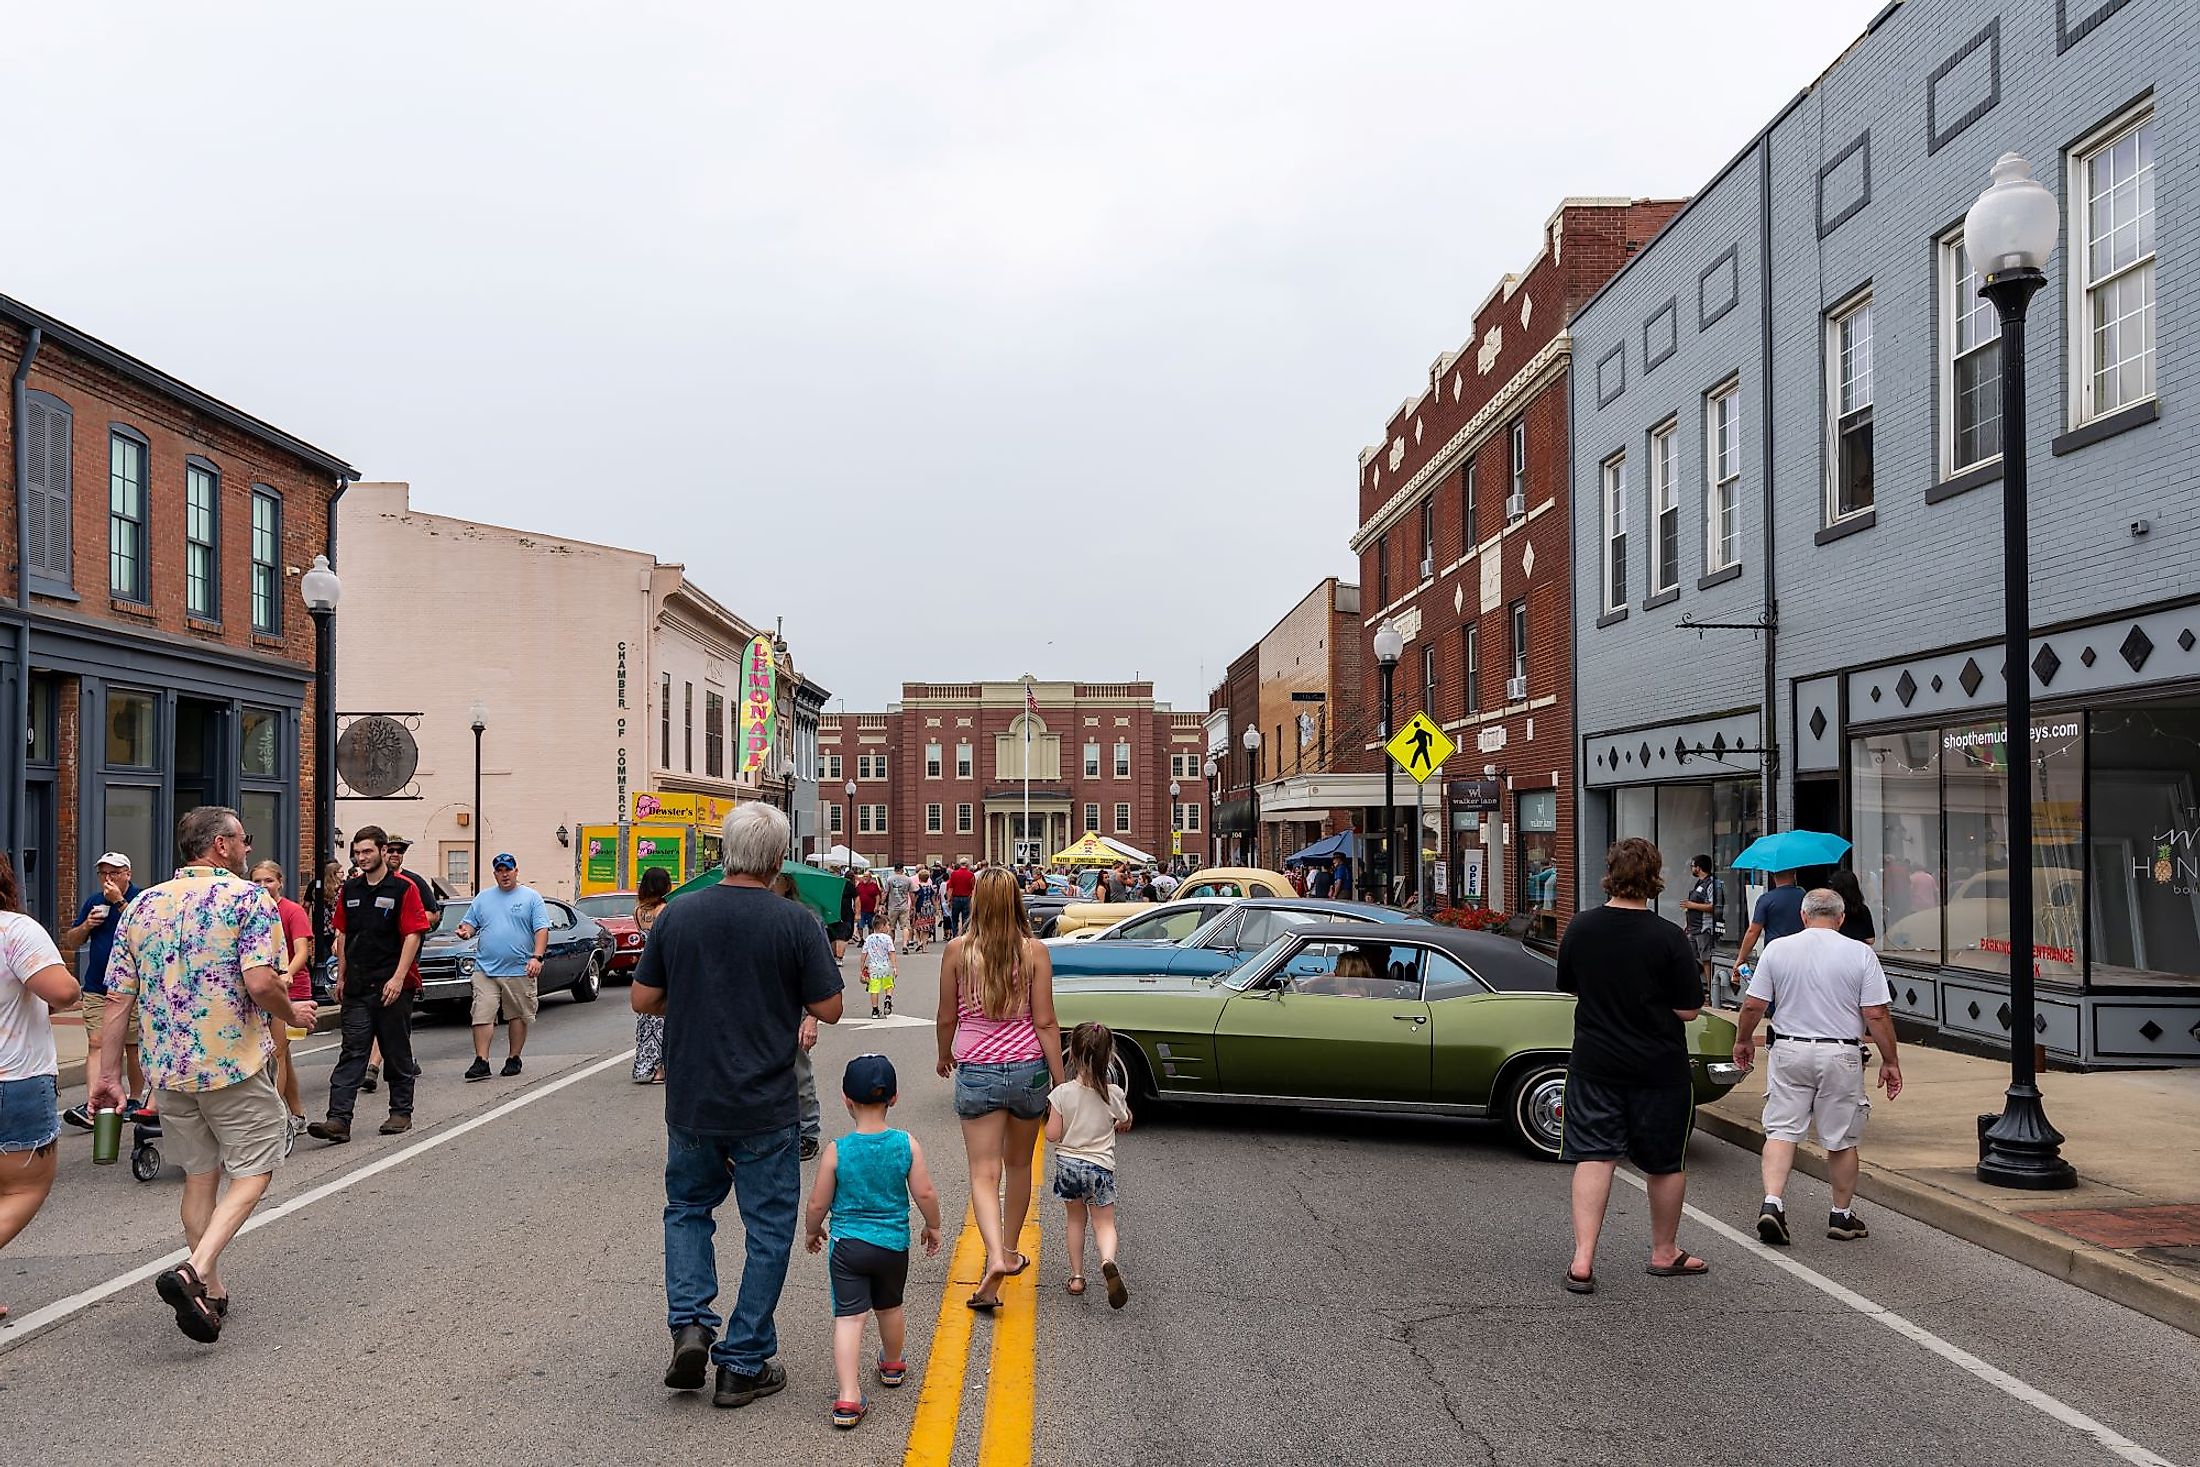 Spectators walk in the streets with cars on display during the Cruisin' The Heartland 2021 car show in downtown Elizabethtown, Kentucky. Editorial credit: Brian Koellish / Shutterstock.com